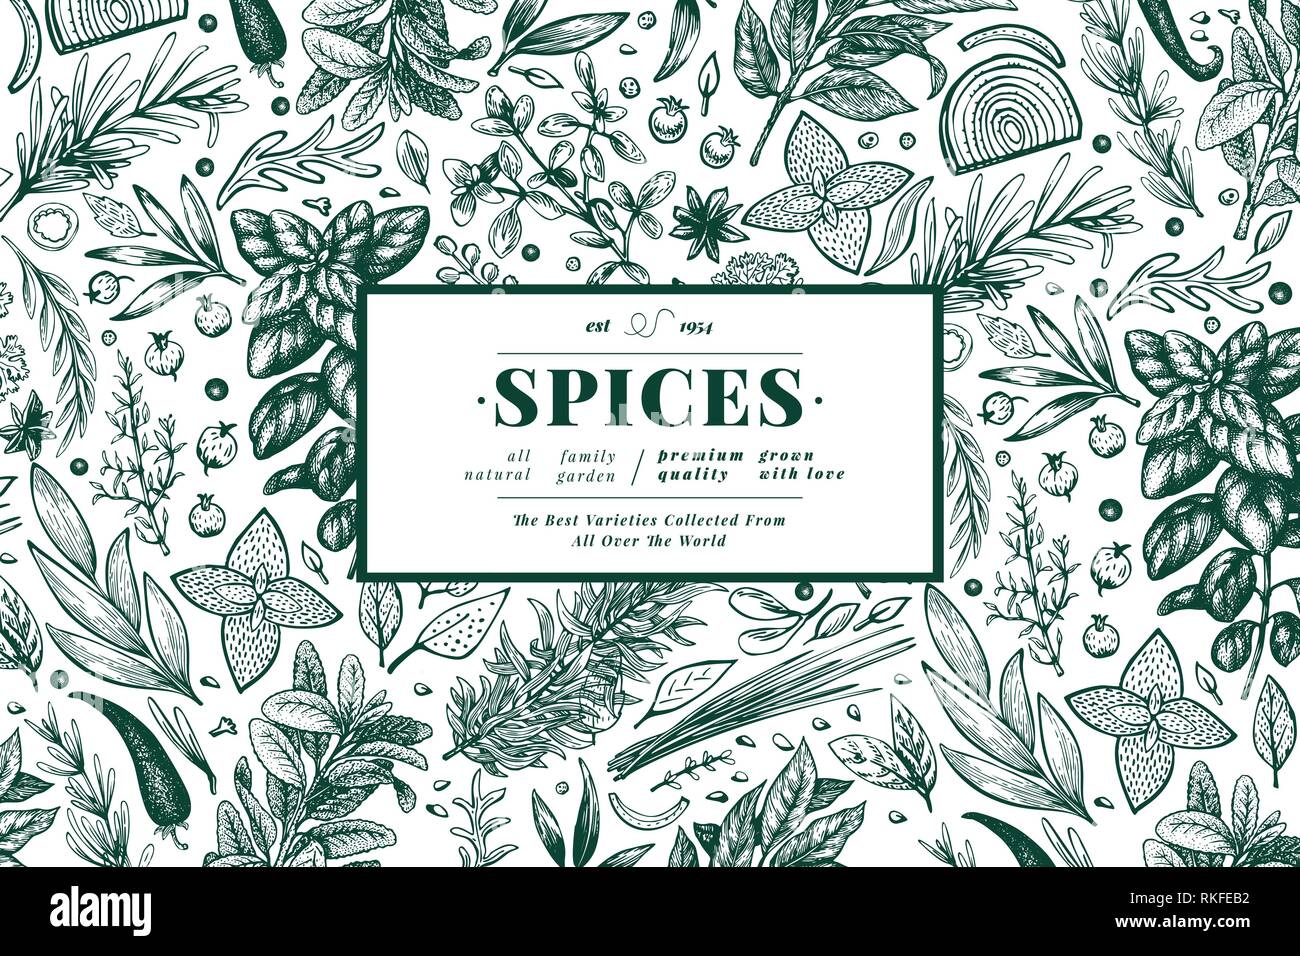 Culinary herbs and spices banner template. Vector background for design menu, packaging, recipes, label, farm market products. Hand drawn vintage botanical illustration. Stock Vector